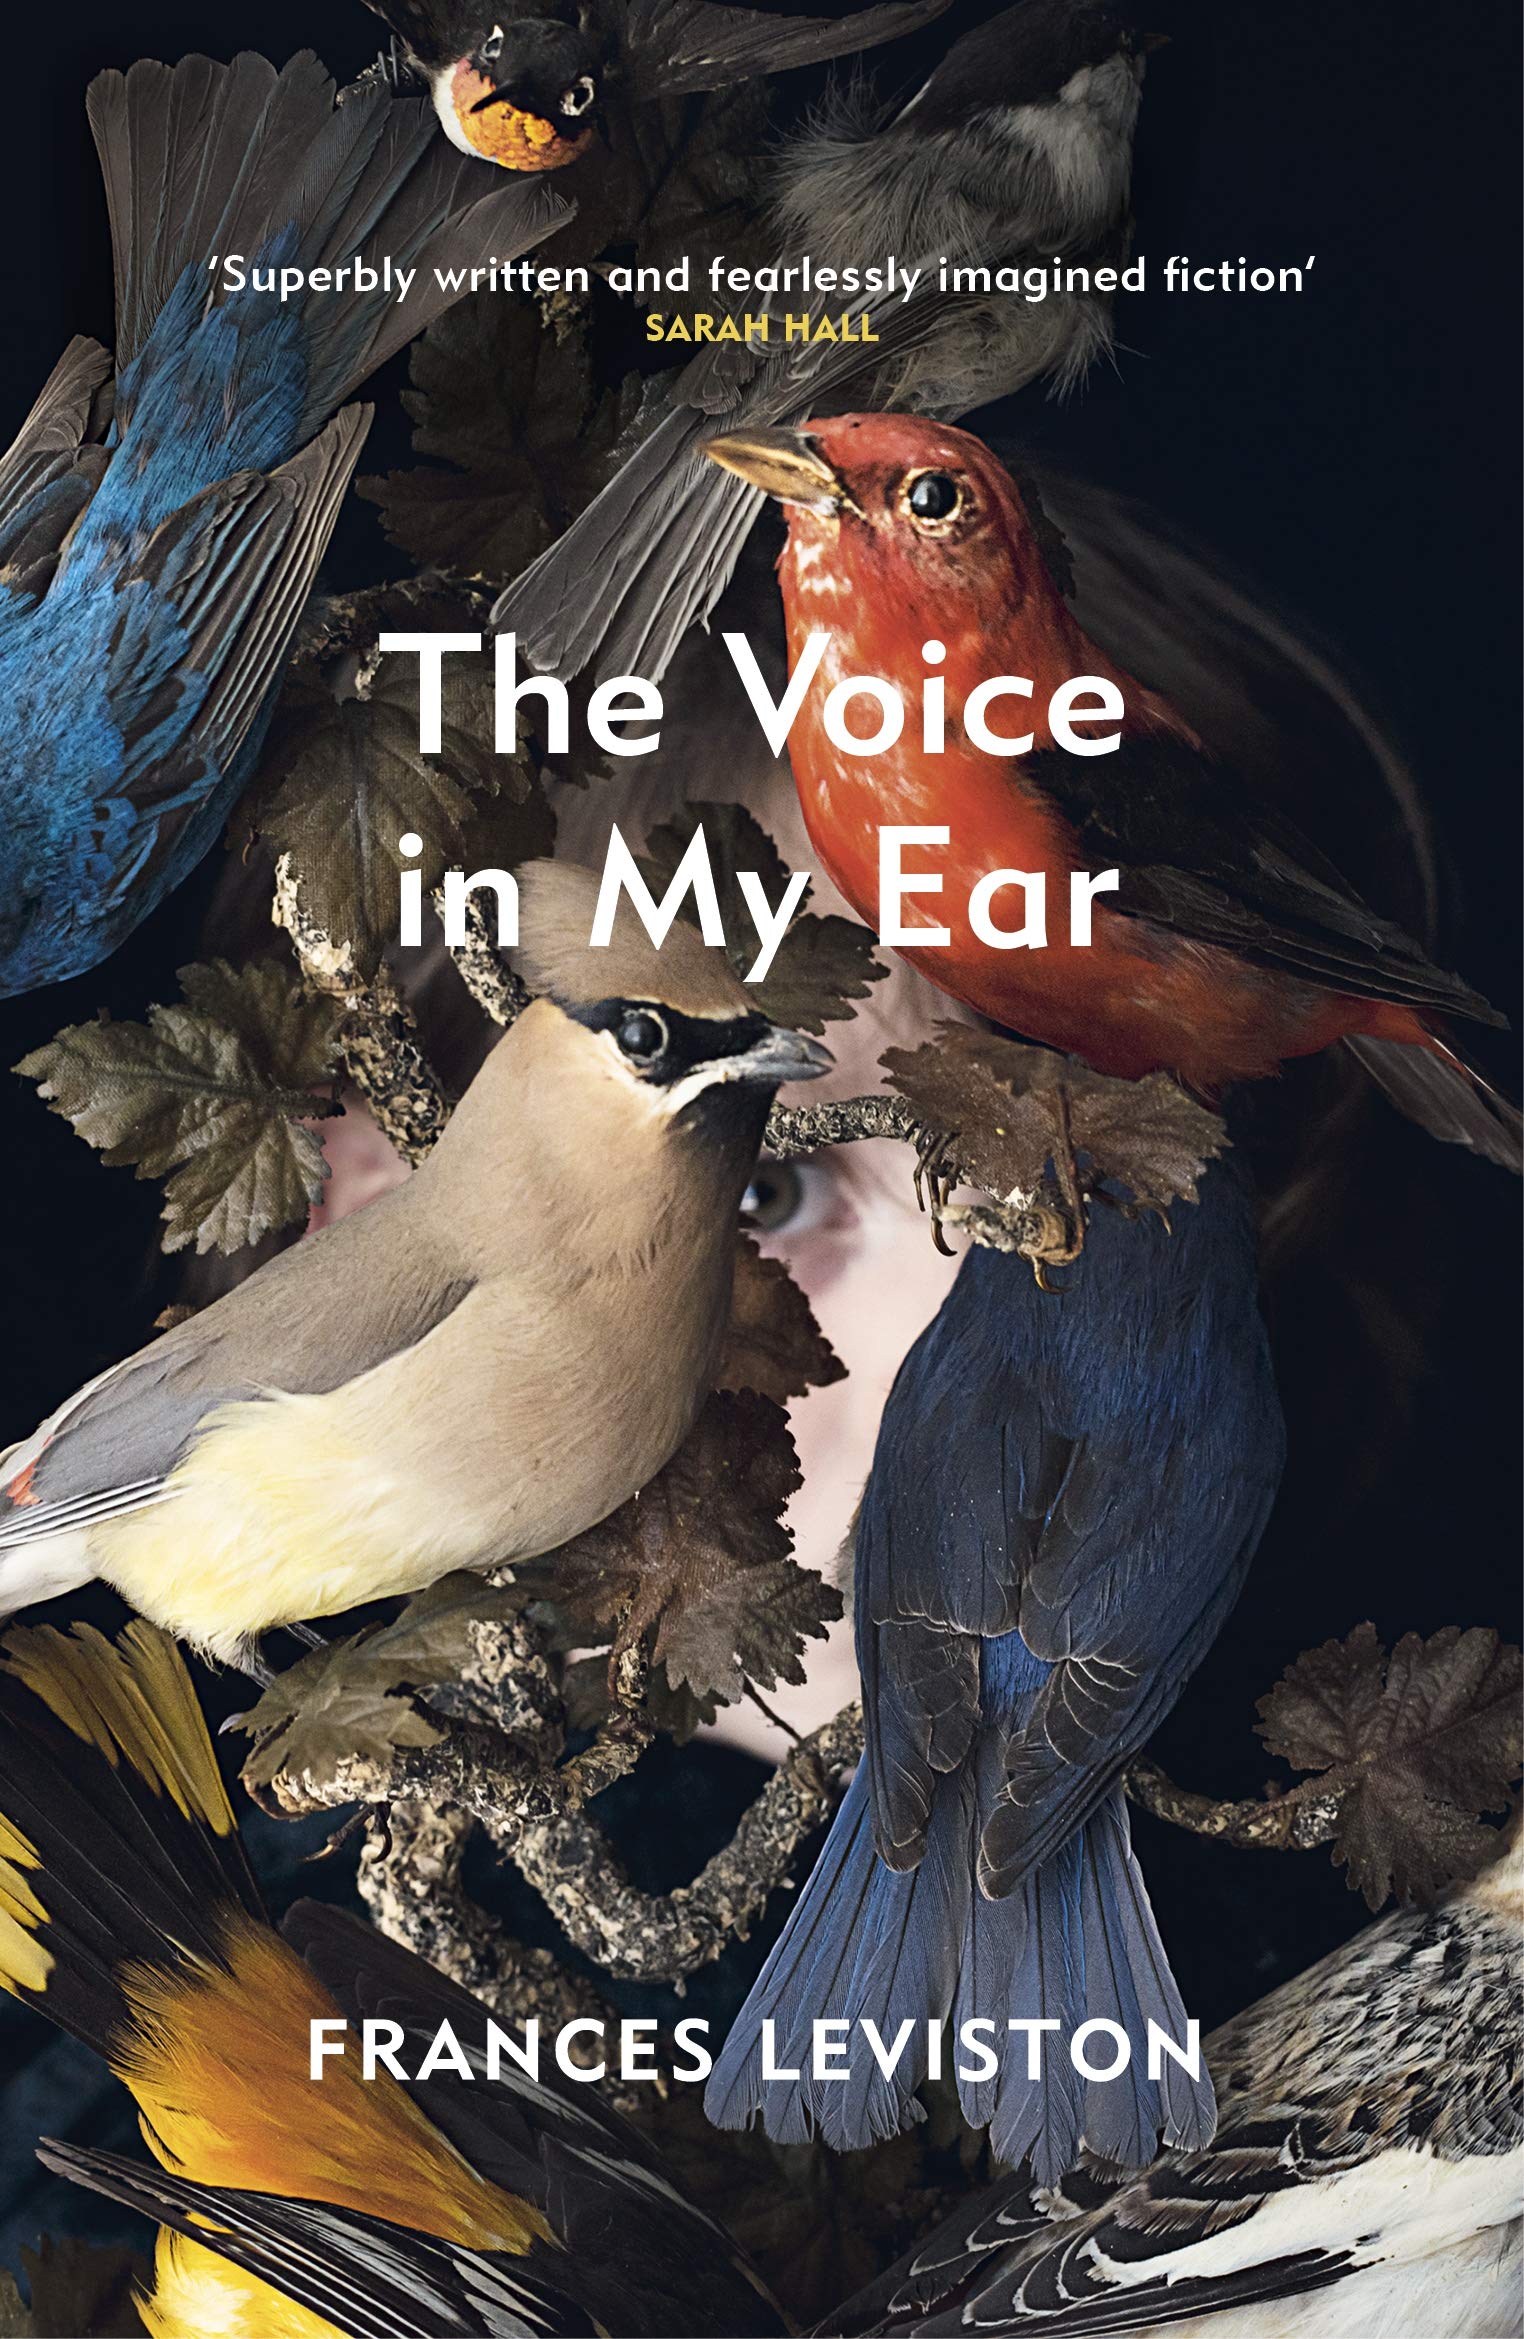 The Voice in My Ear